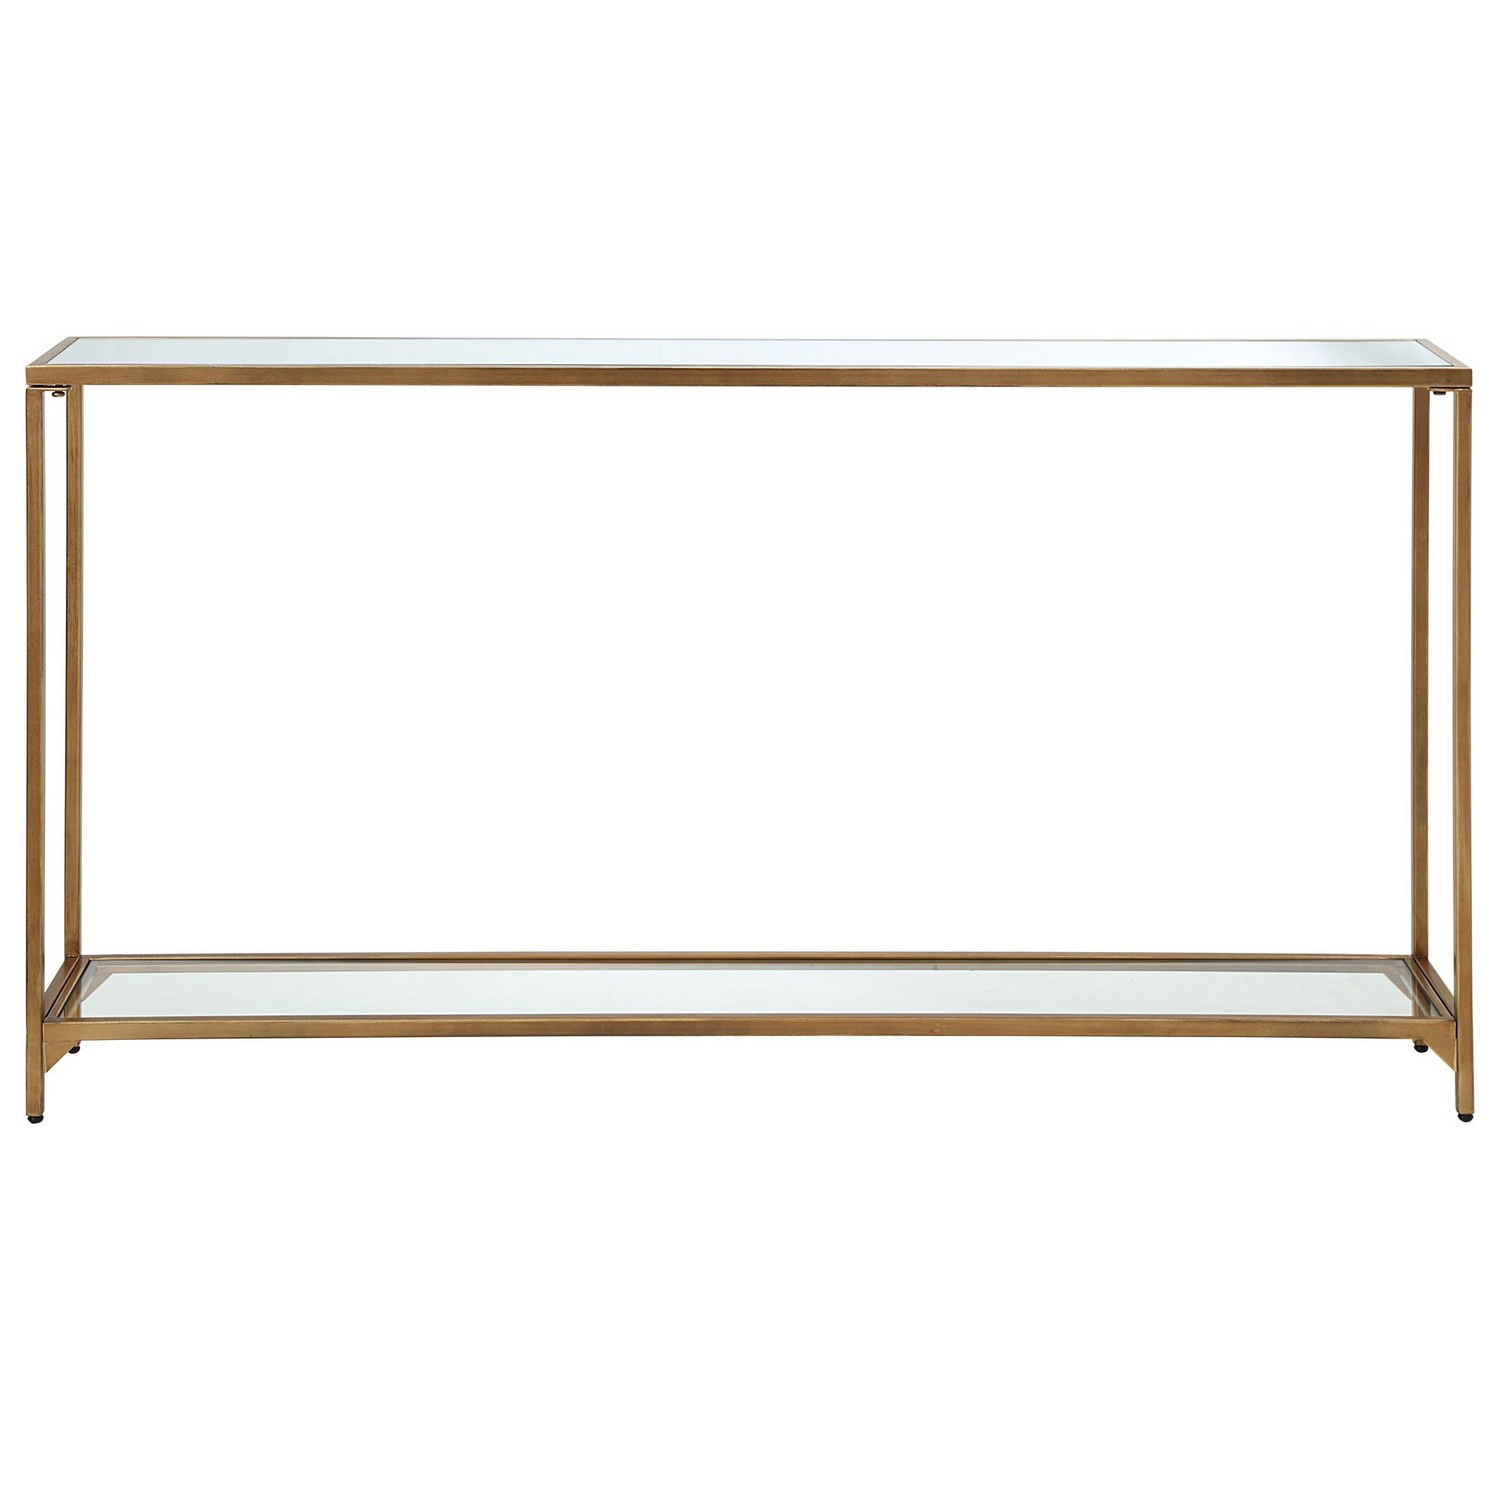 Uttermost W23005 Console Table - Warm Gold